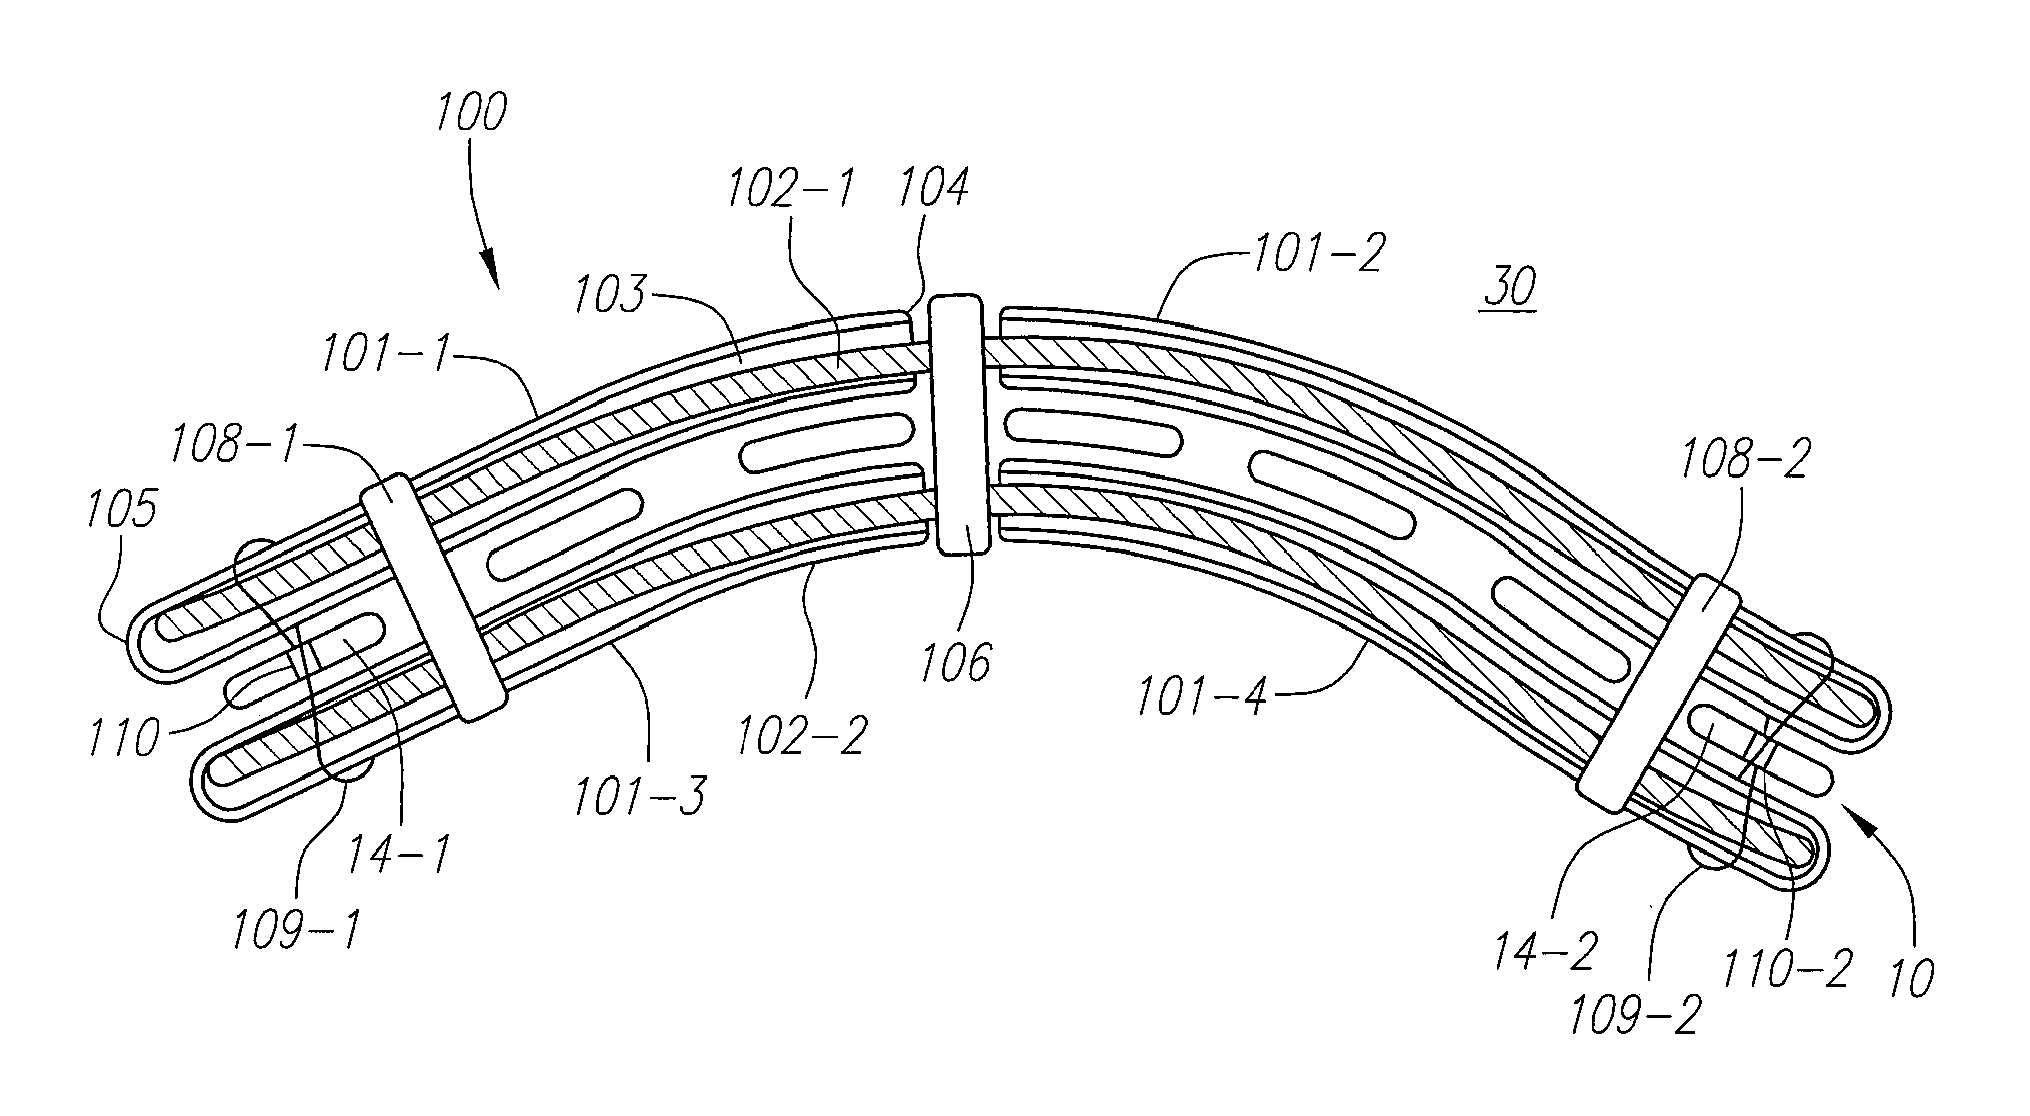 Systems, Devices and Methods for the Correction of Spinal Deformities